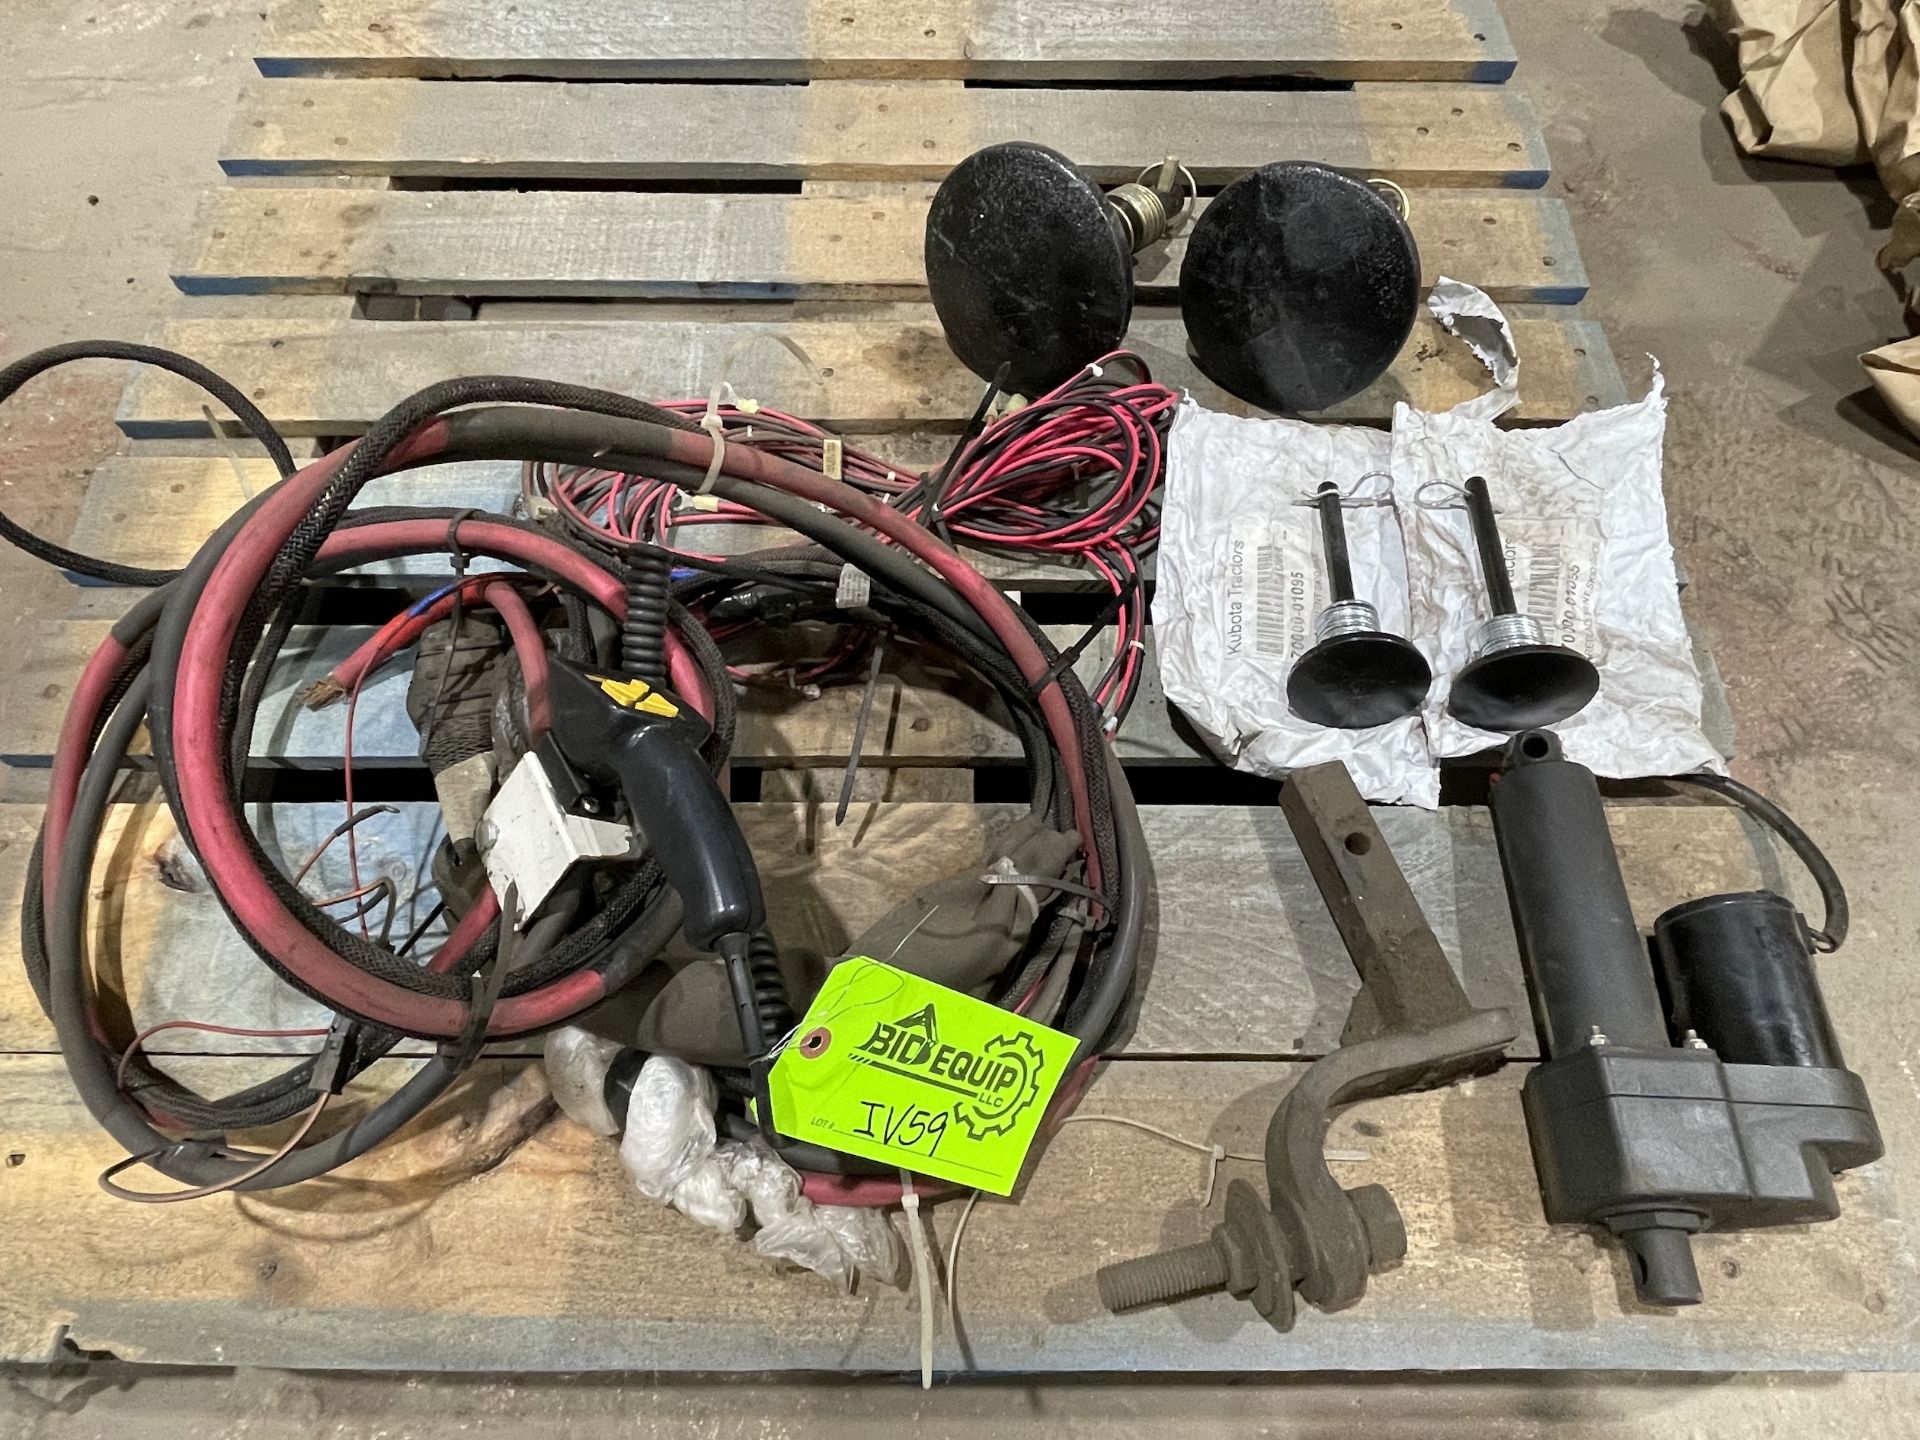 Lot of Miscellanous Equipment Parts (IV59) - Image 2 of 12